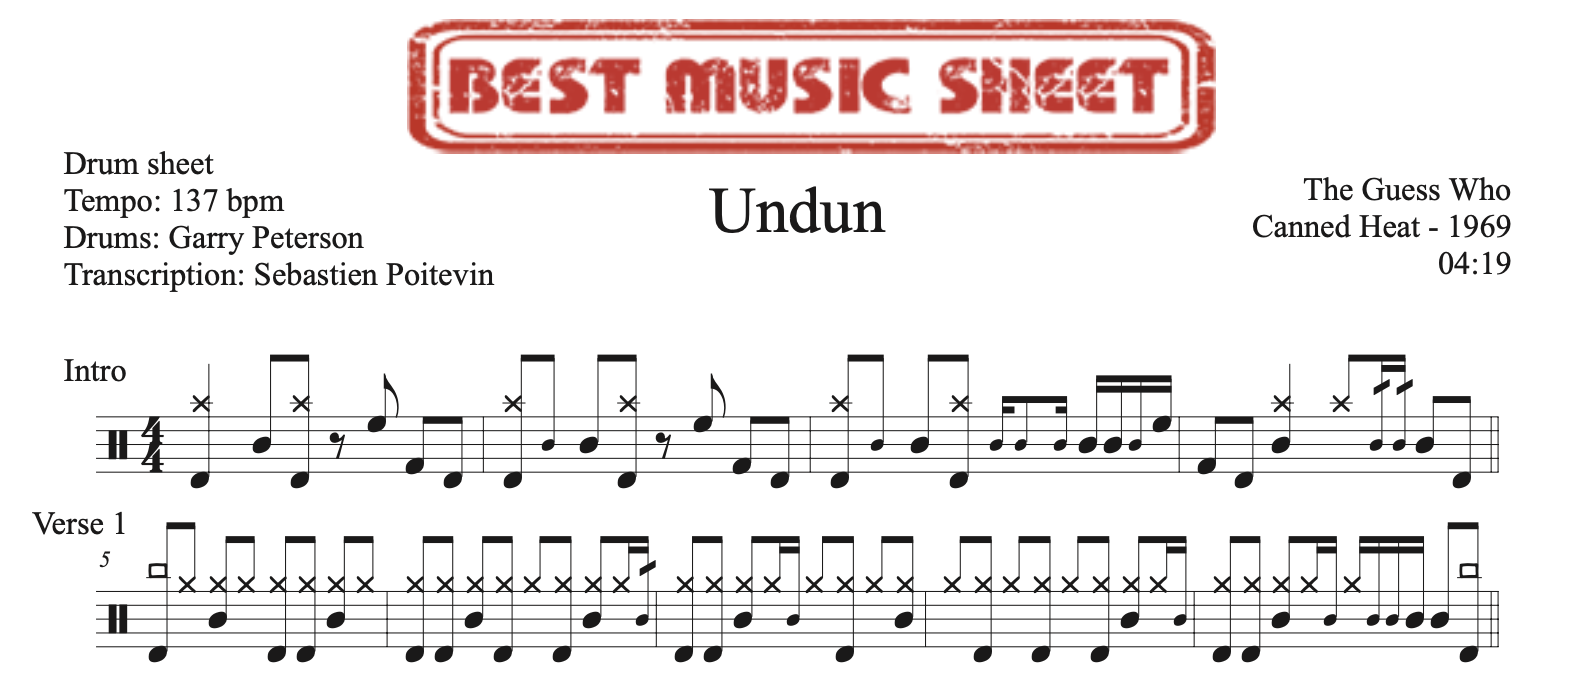 Sample drum sheet of Undun by The Guess Who